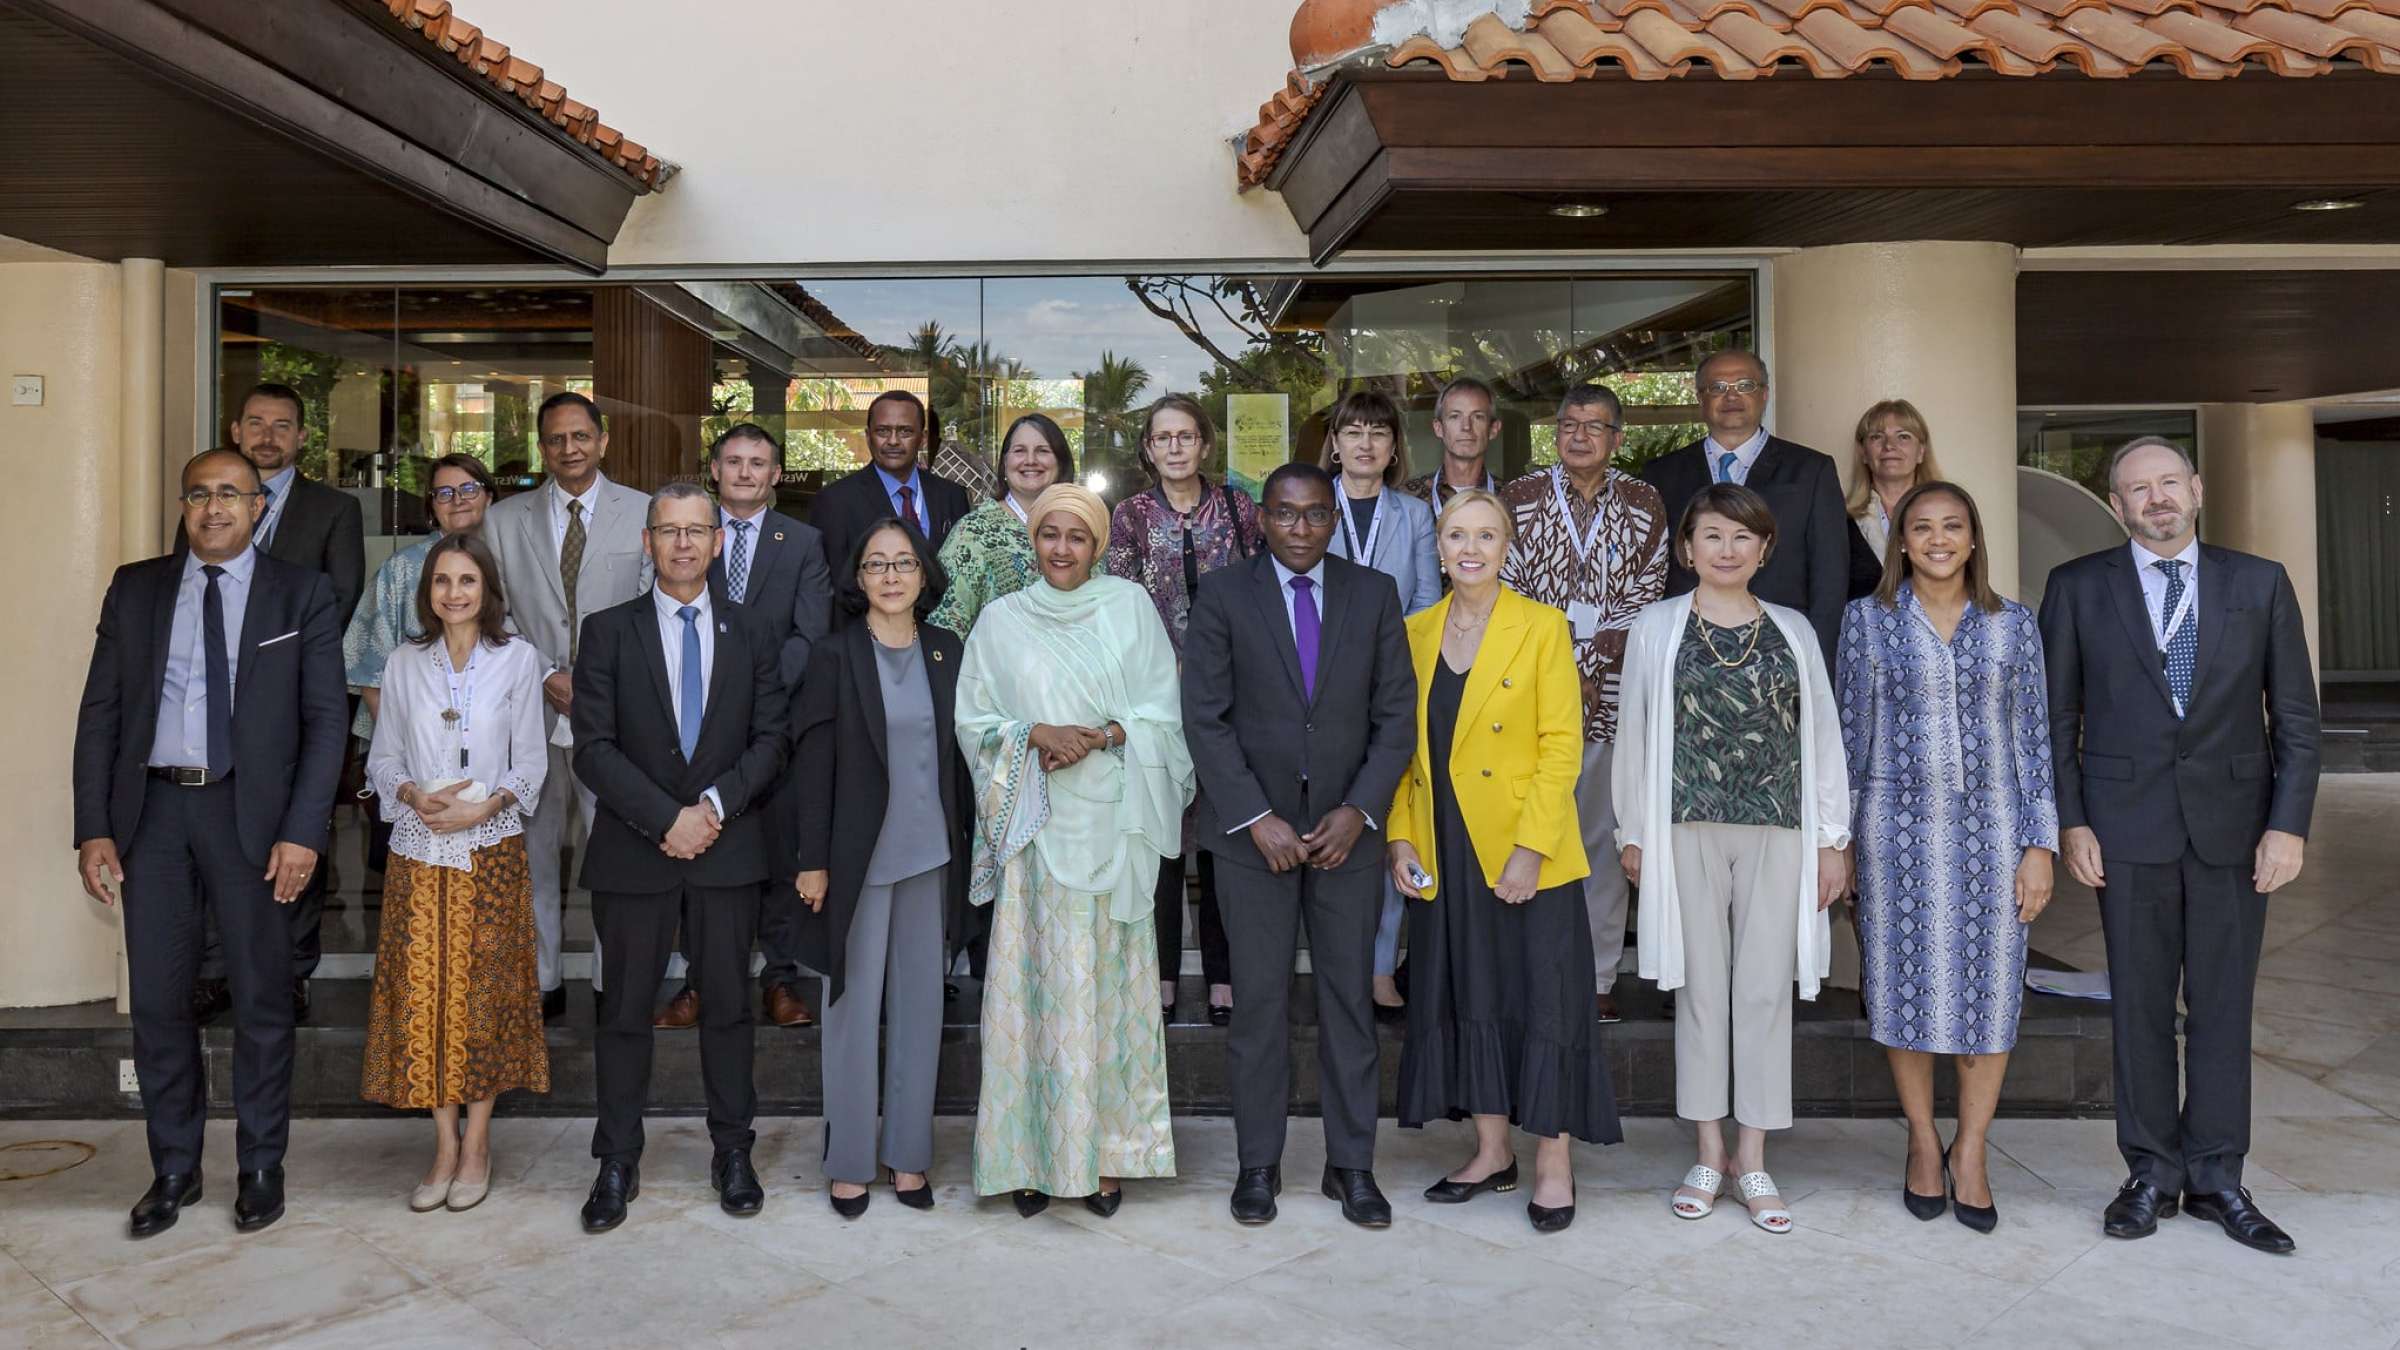 UN High-Level Delegation at 7th Global Plaform for Disaster Risk Reduction in Bali